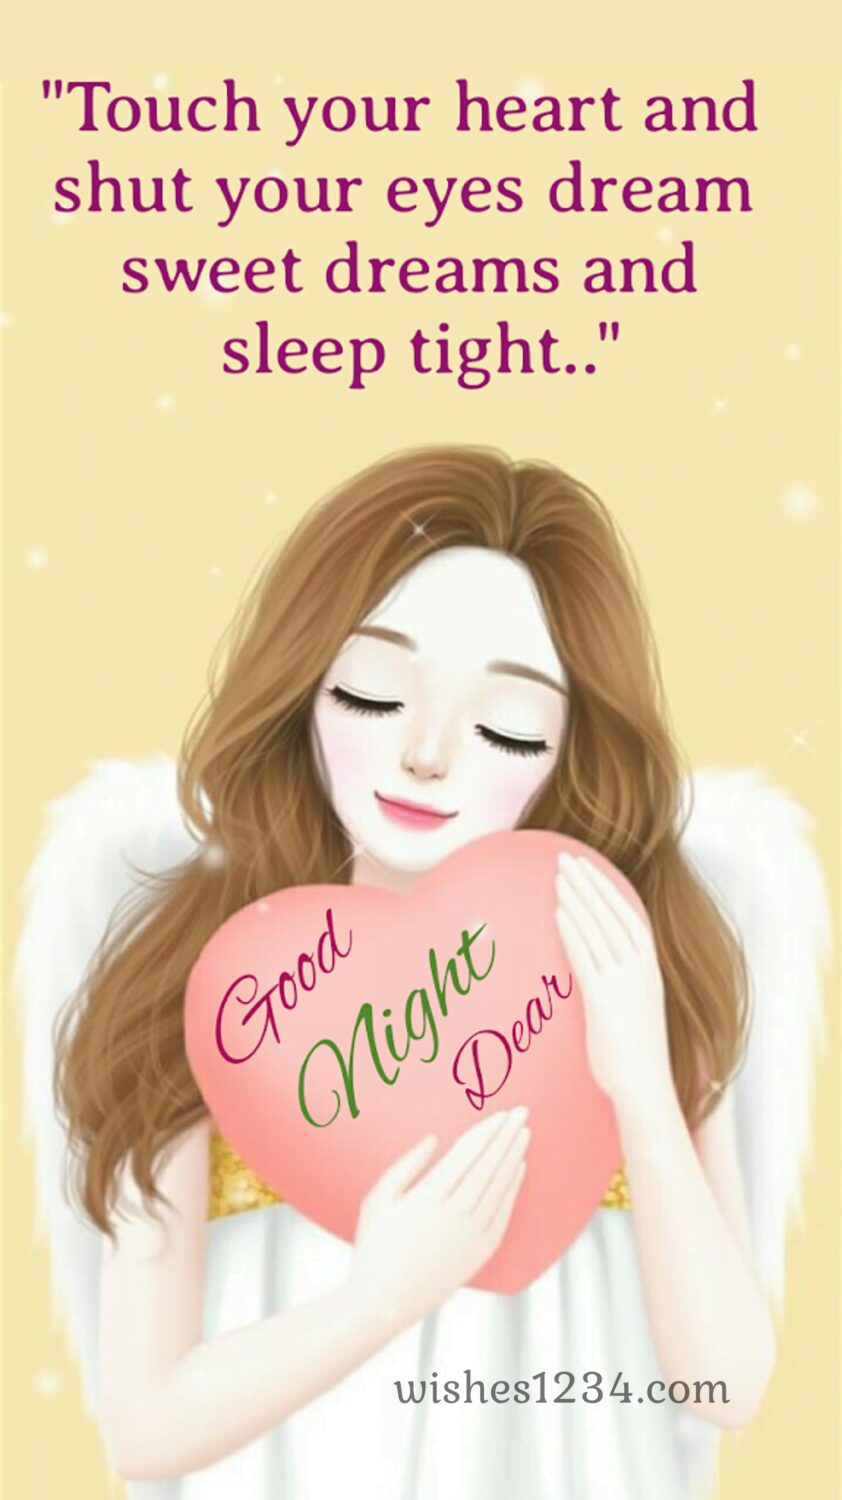 Girl with heart shape pillow in her hand, Good night wishes for Him.